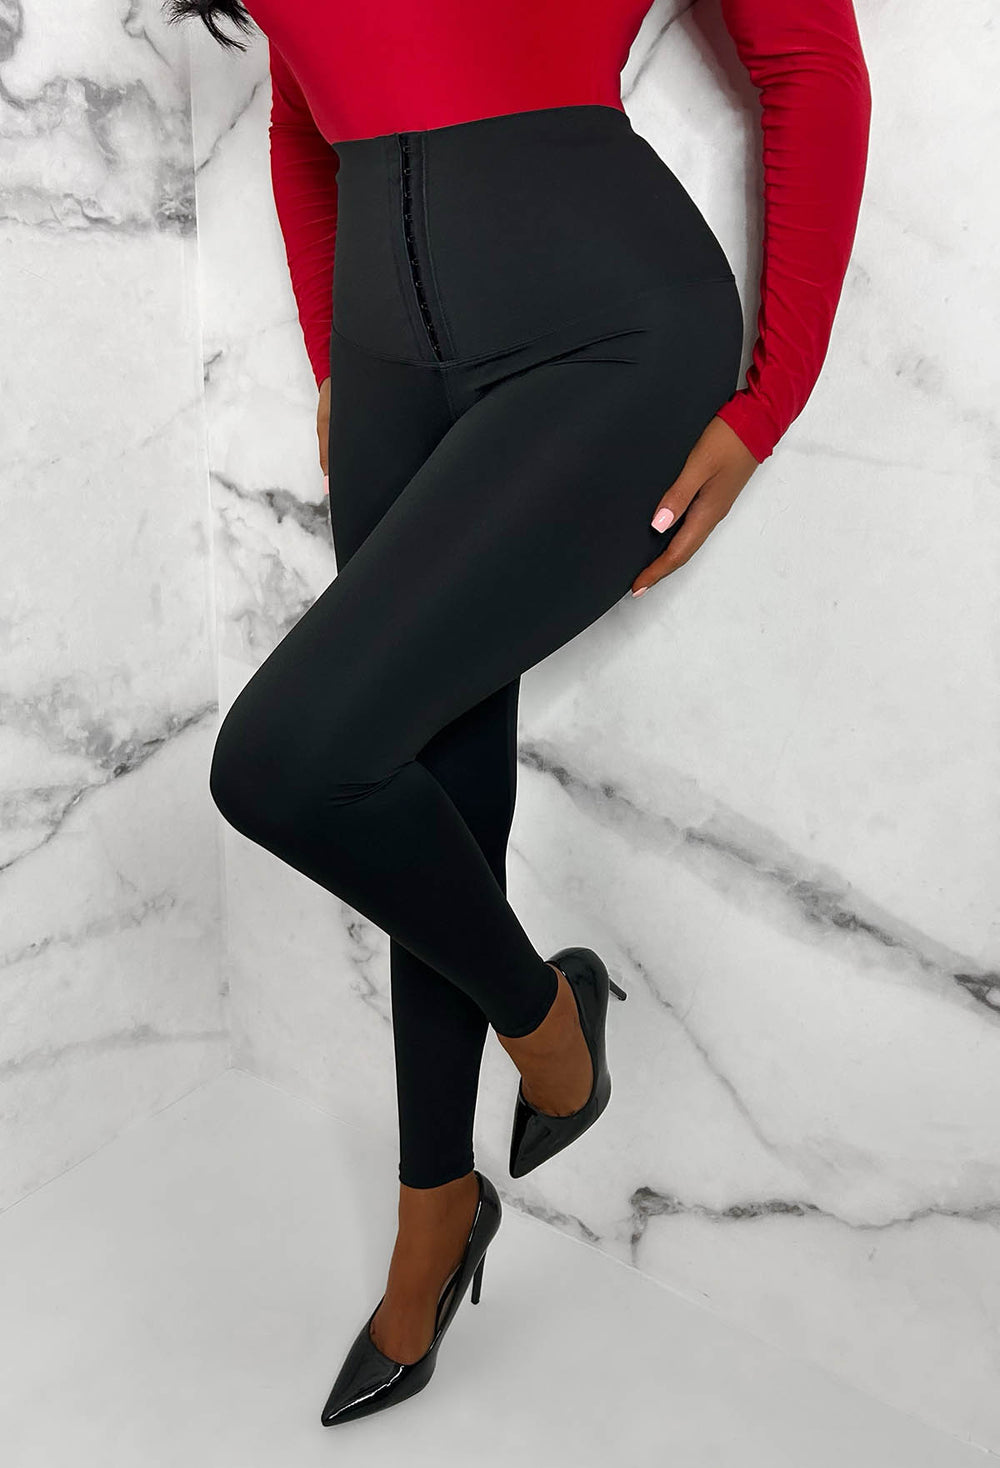 Cinched & Savvy Black Waist Cinched Corset Detail Leggings Limited